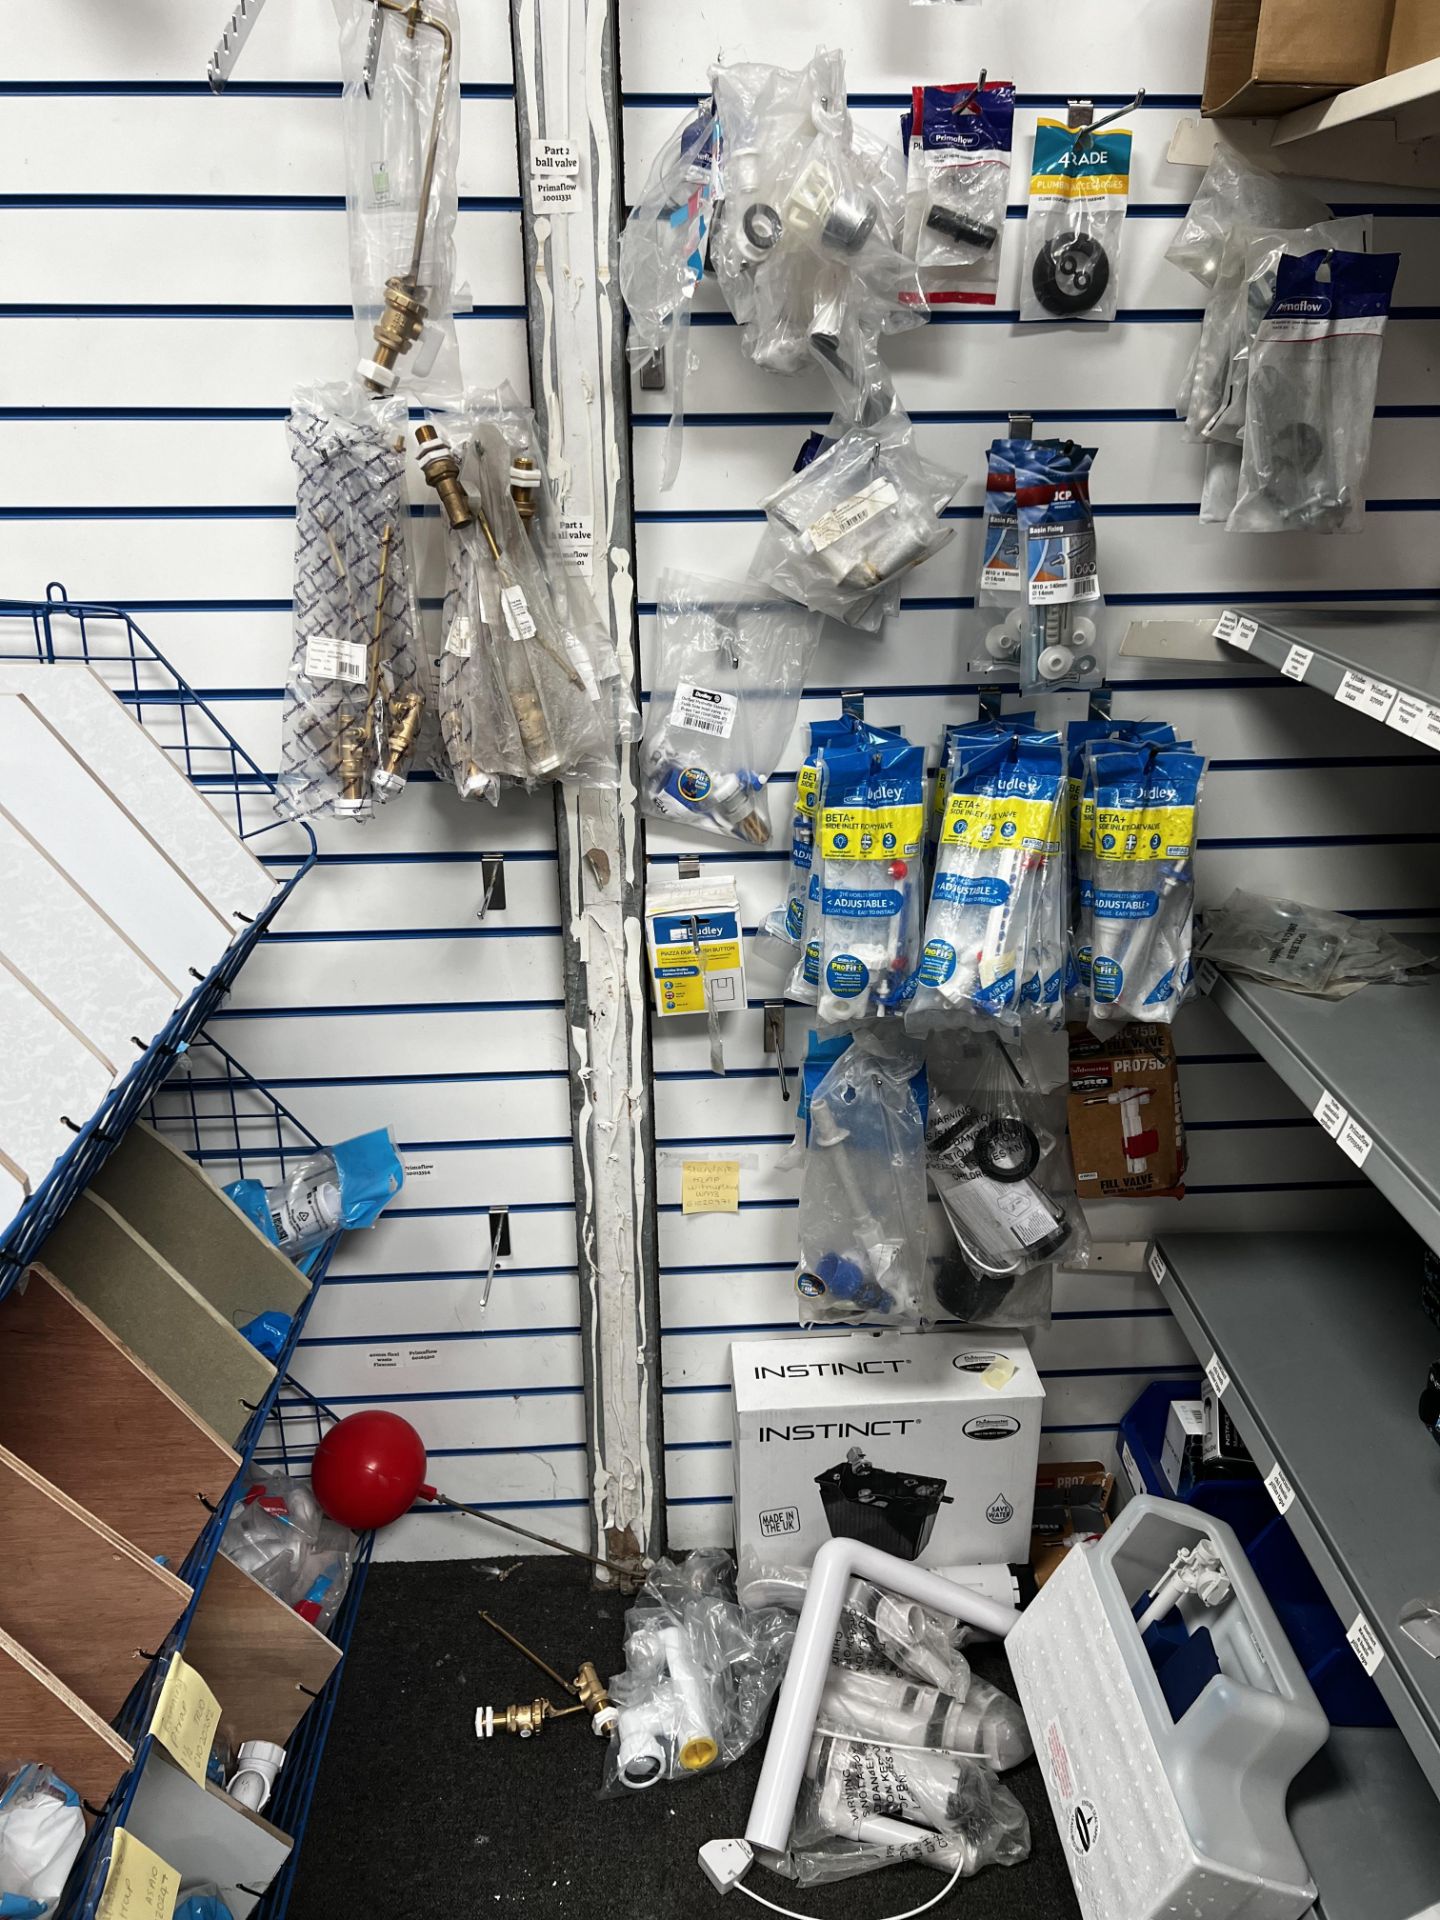 All Plumbing & Heating Stock including all racking and storage shelves/bins as shown in photos - Image 13 of 34